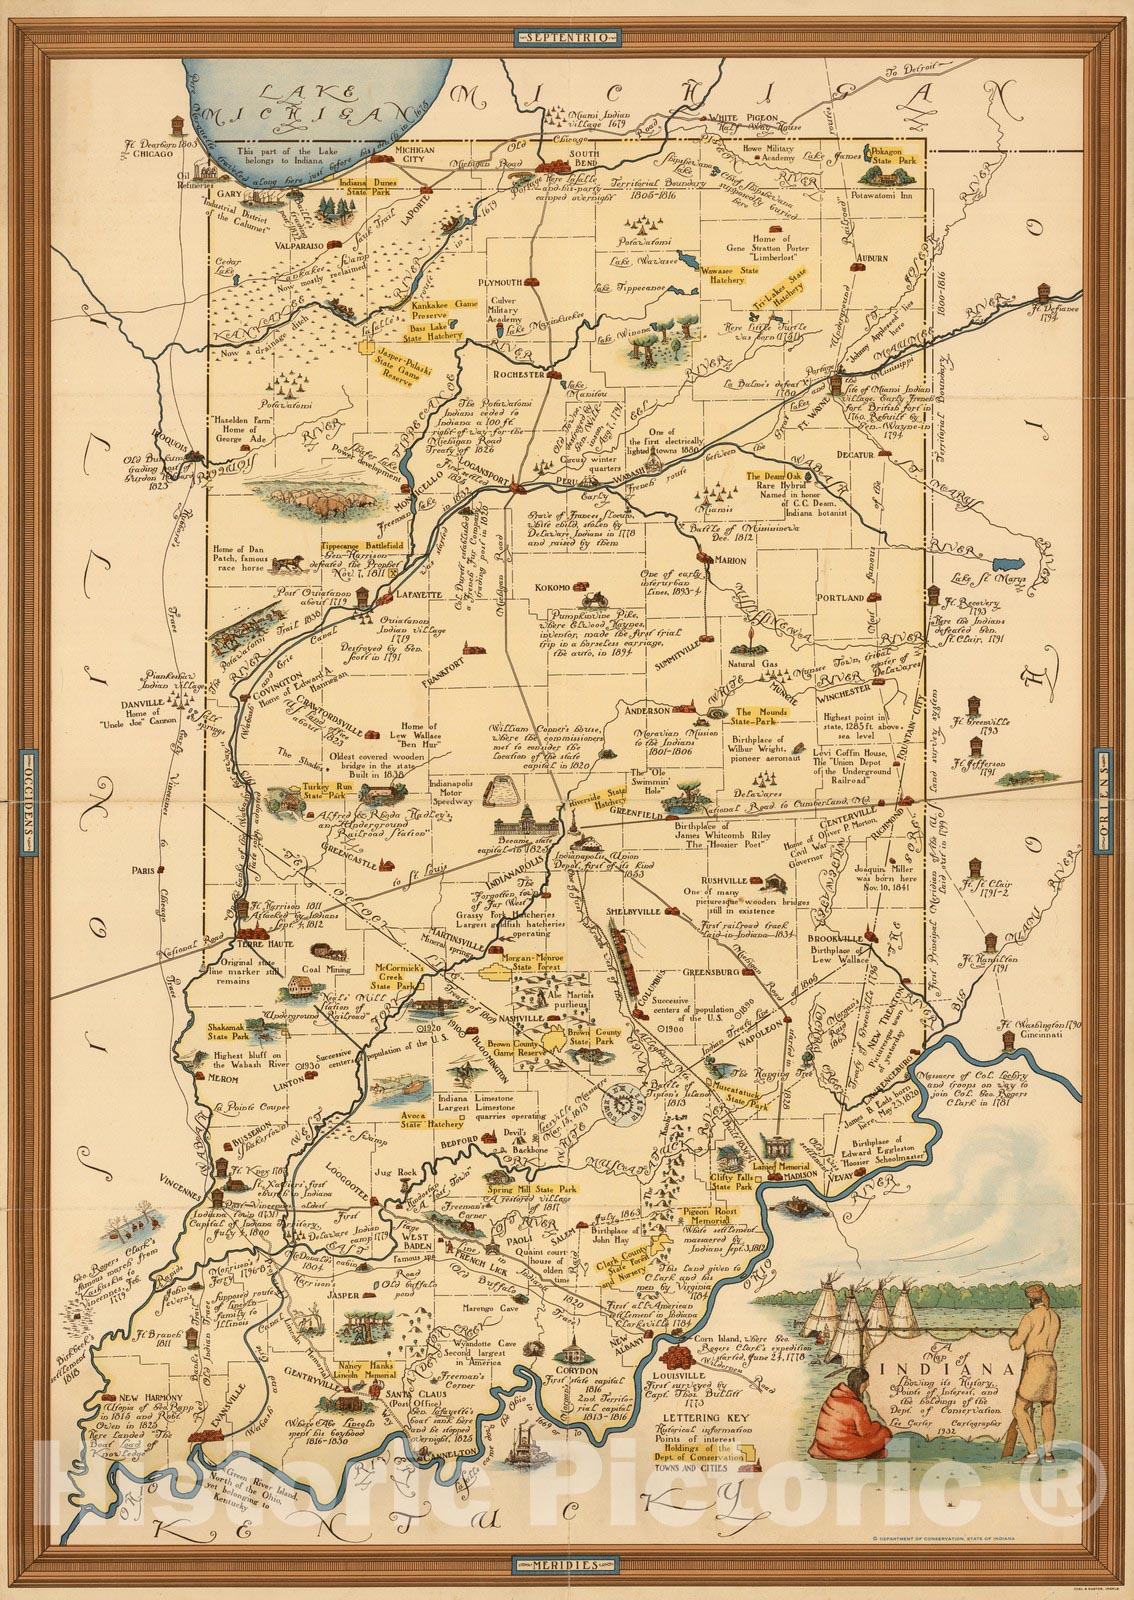 Historic Map - A Map of Indiana Showing its History, Points of Interest, and the Holdings of the Dept. of Conservation, 1932 - Vintage Wall Art